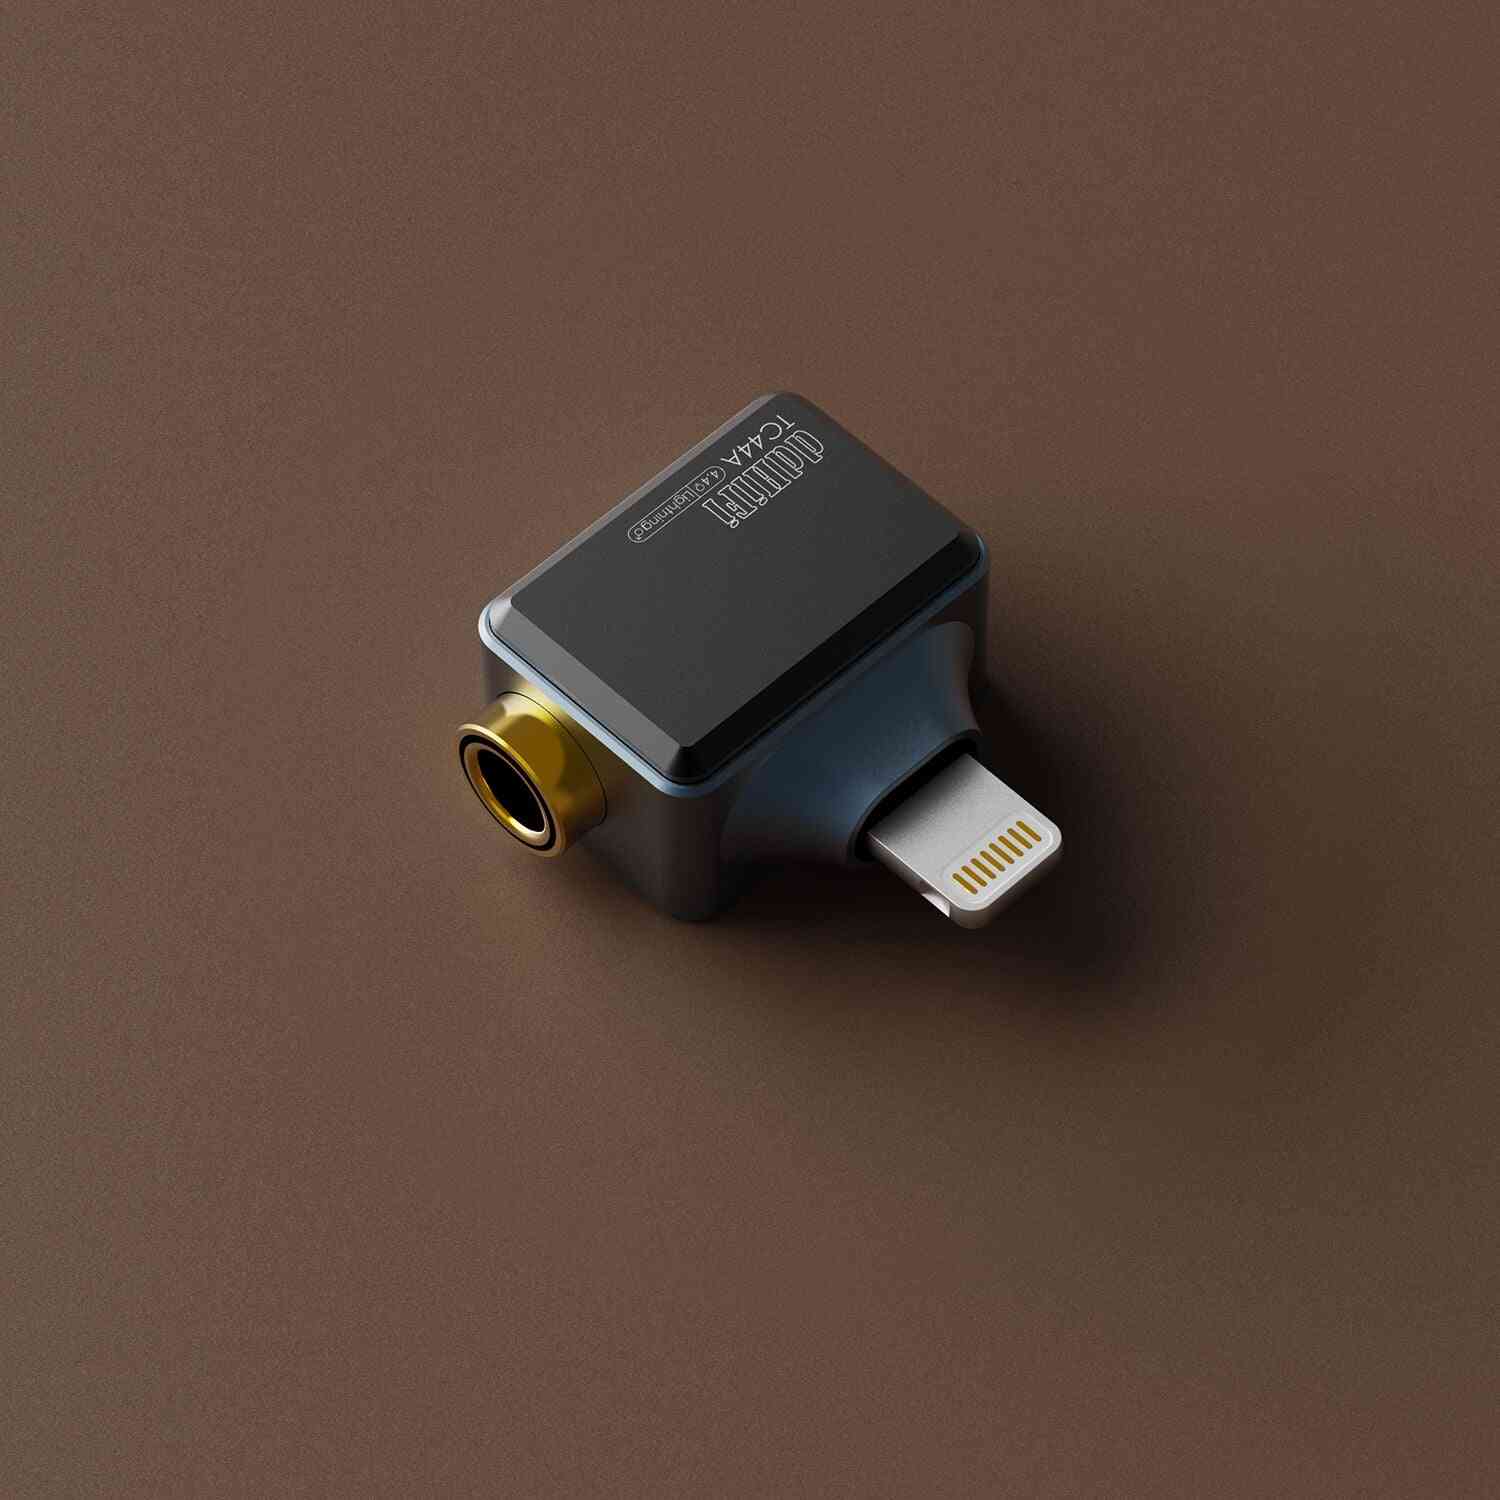 Dd Ddhifi Tc44a Light-ning To 4.4mm Headphone Adapter For Iphone, Cs43131 Dac Chip, Supports Native Dsd256 And 32-bit 384khz Pcm